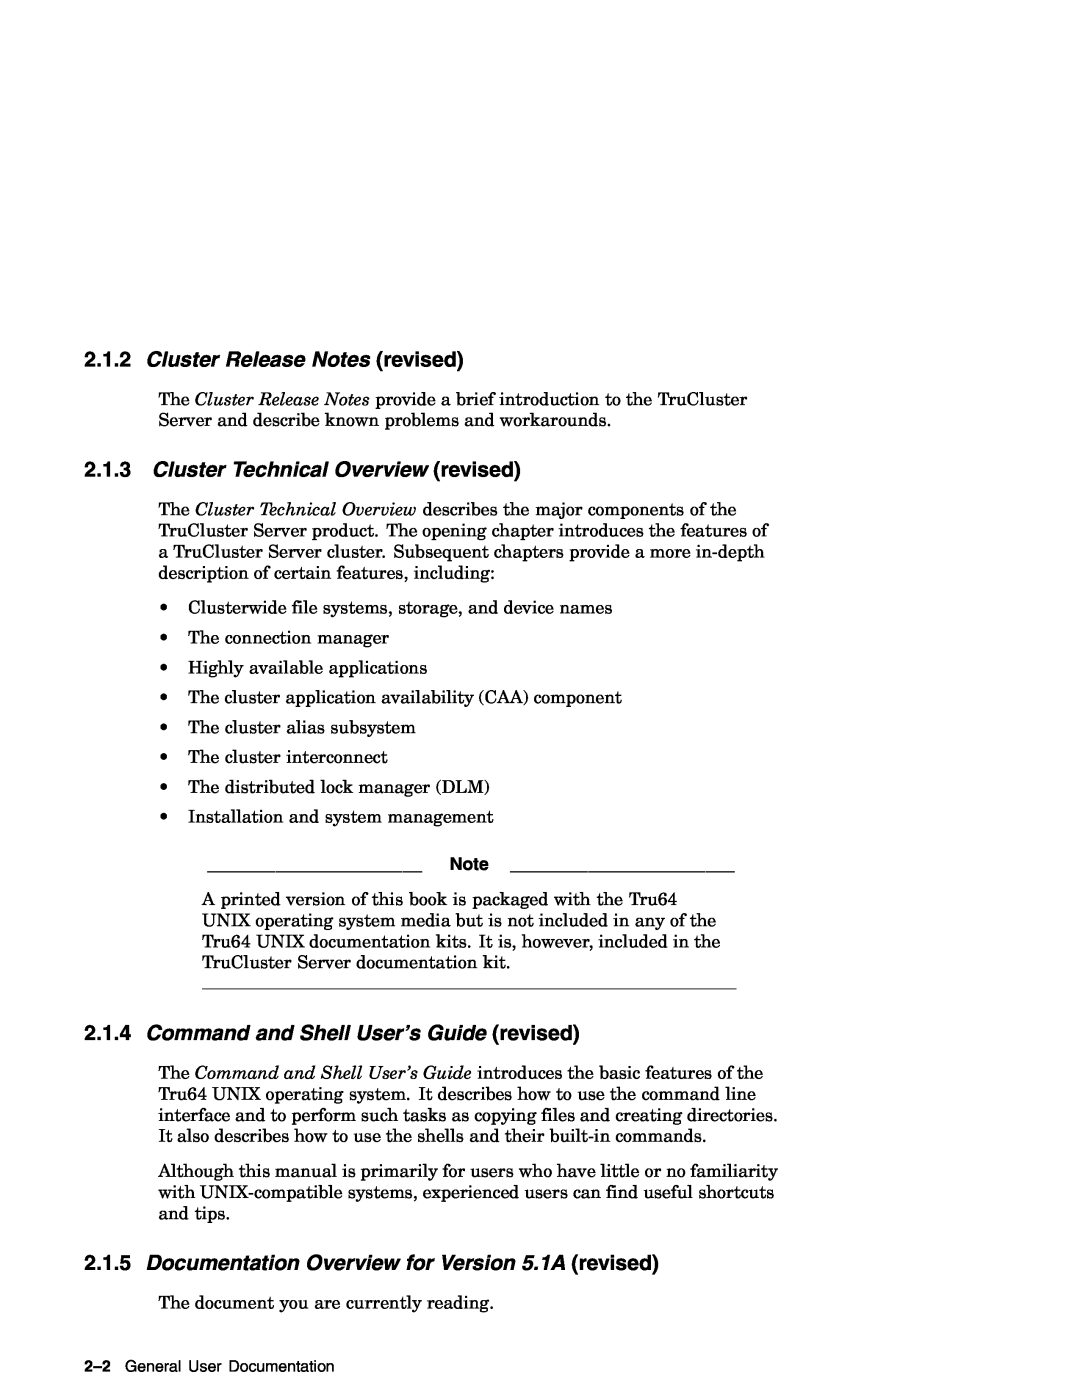 Compaq AA-RH8RD-TE manual Cluster Release Notes revised, Cluster Technical Overview revised 